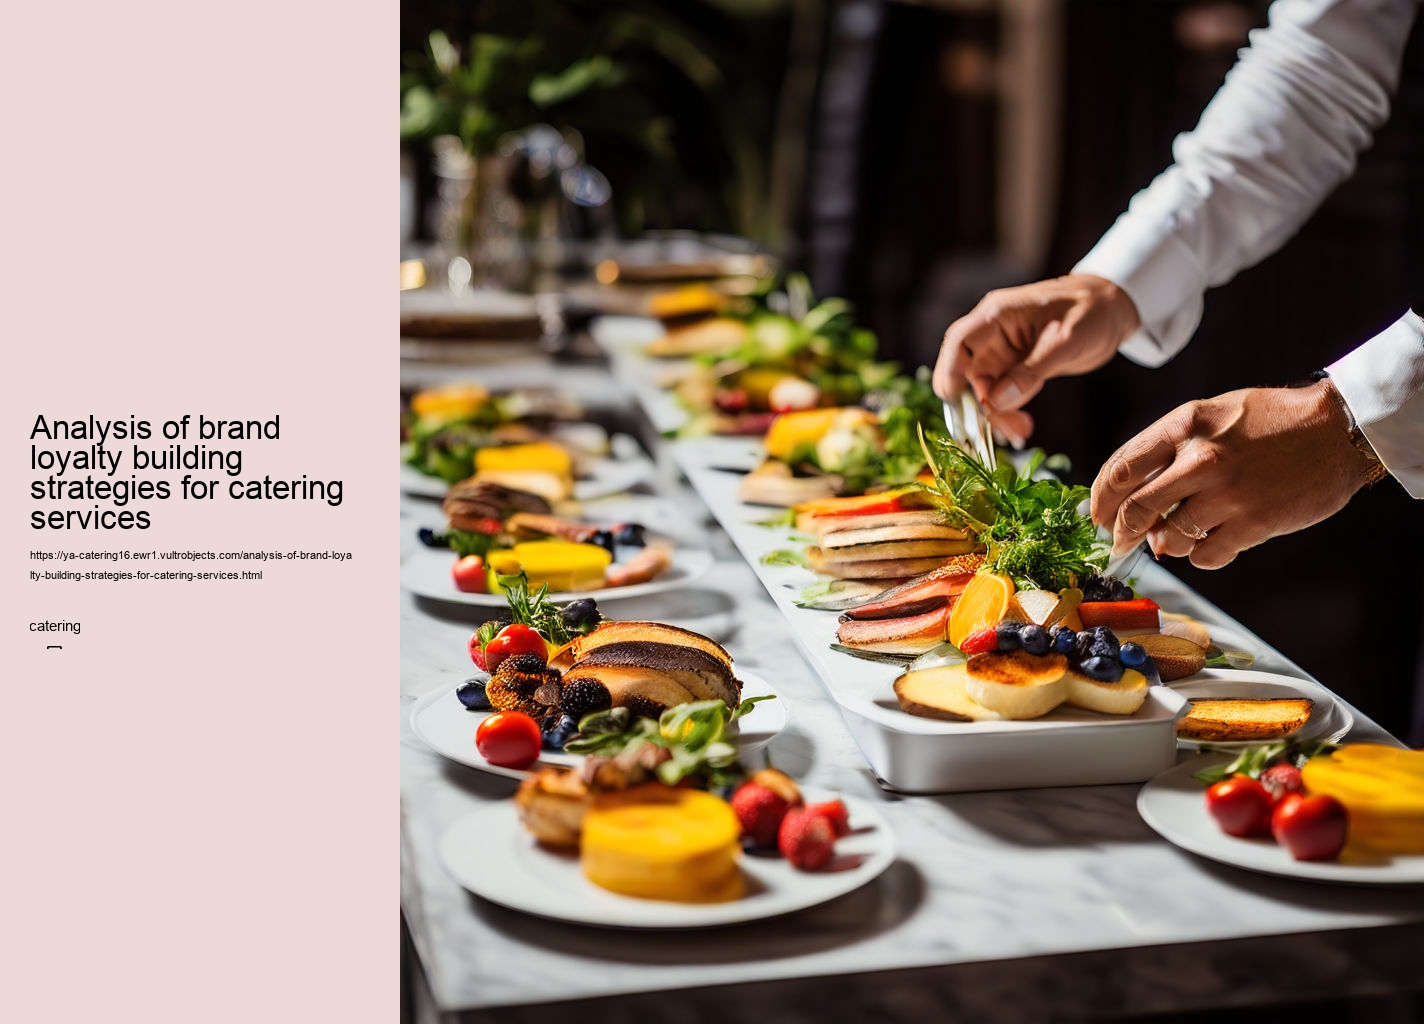 Analysis of brand loyalty building strategies for catering services